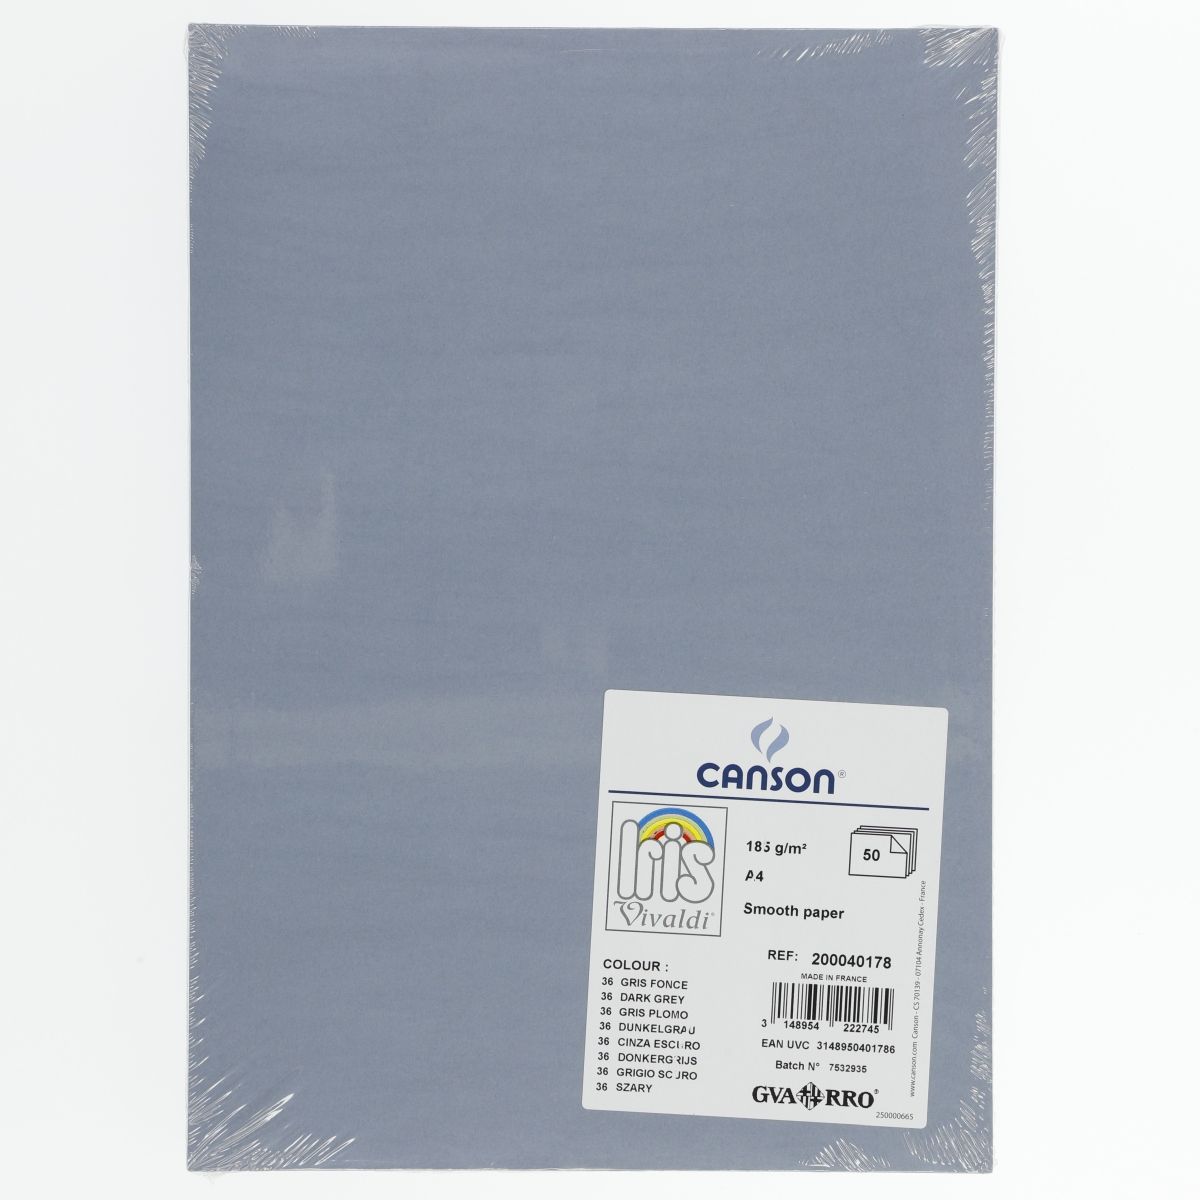 Brystol Canson A4 szary 185g 50k (200040178)